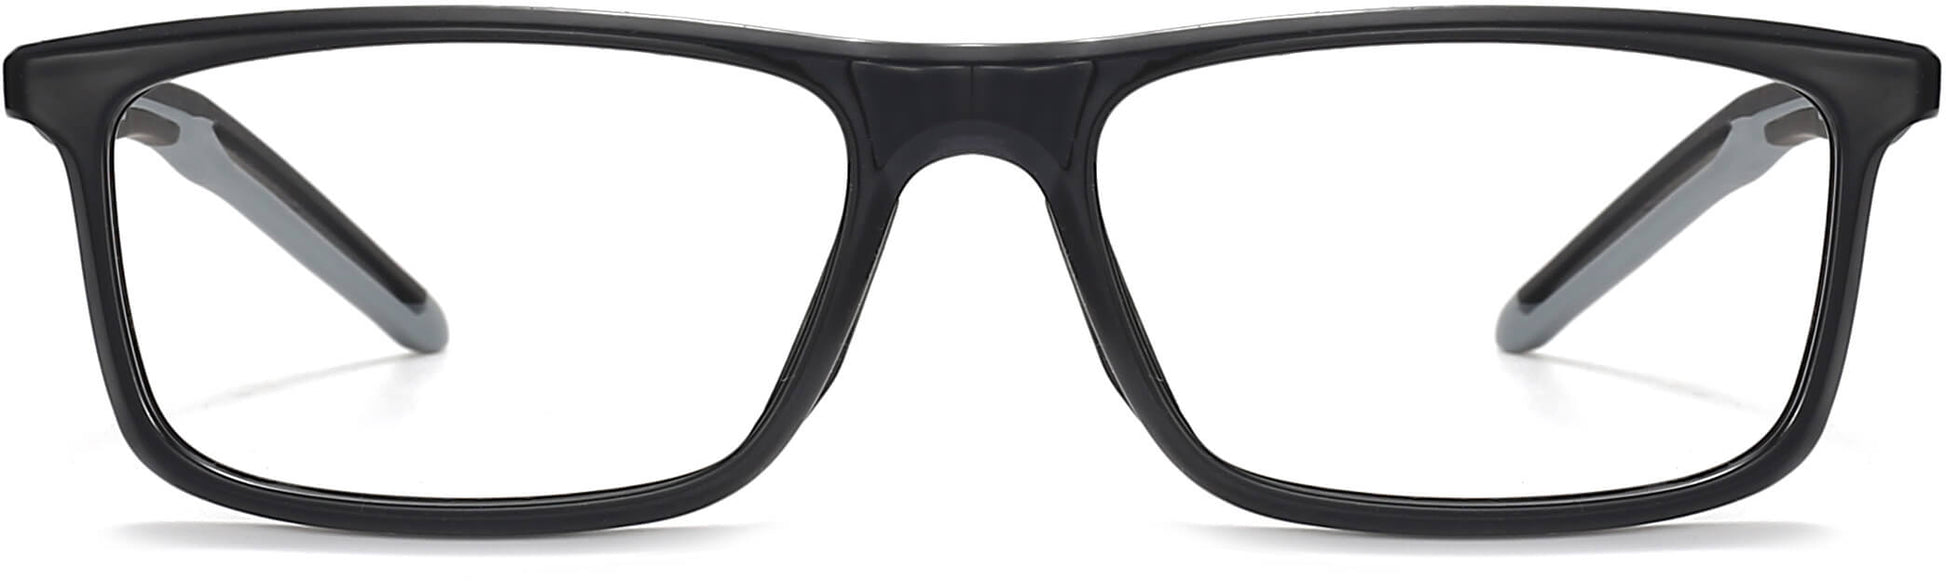 Jagger Rectangle Black Eyeglasses from ANRRI, front view